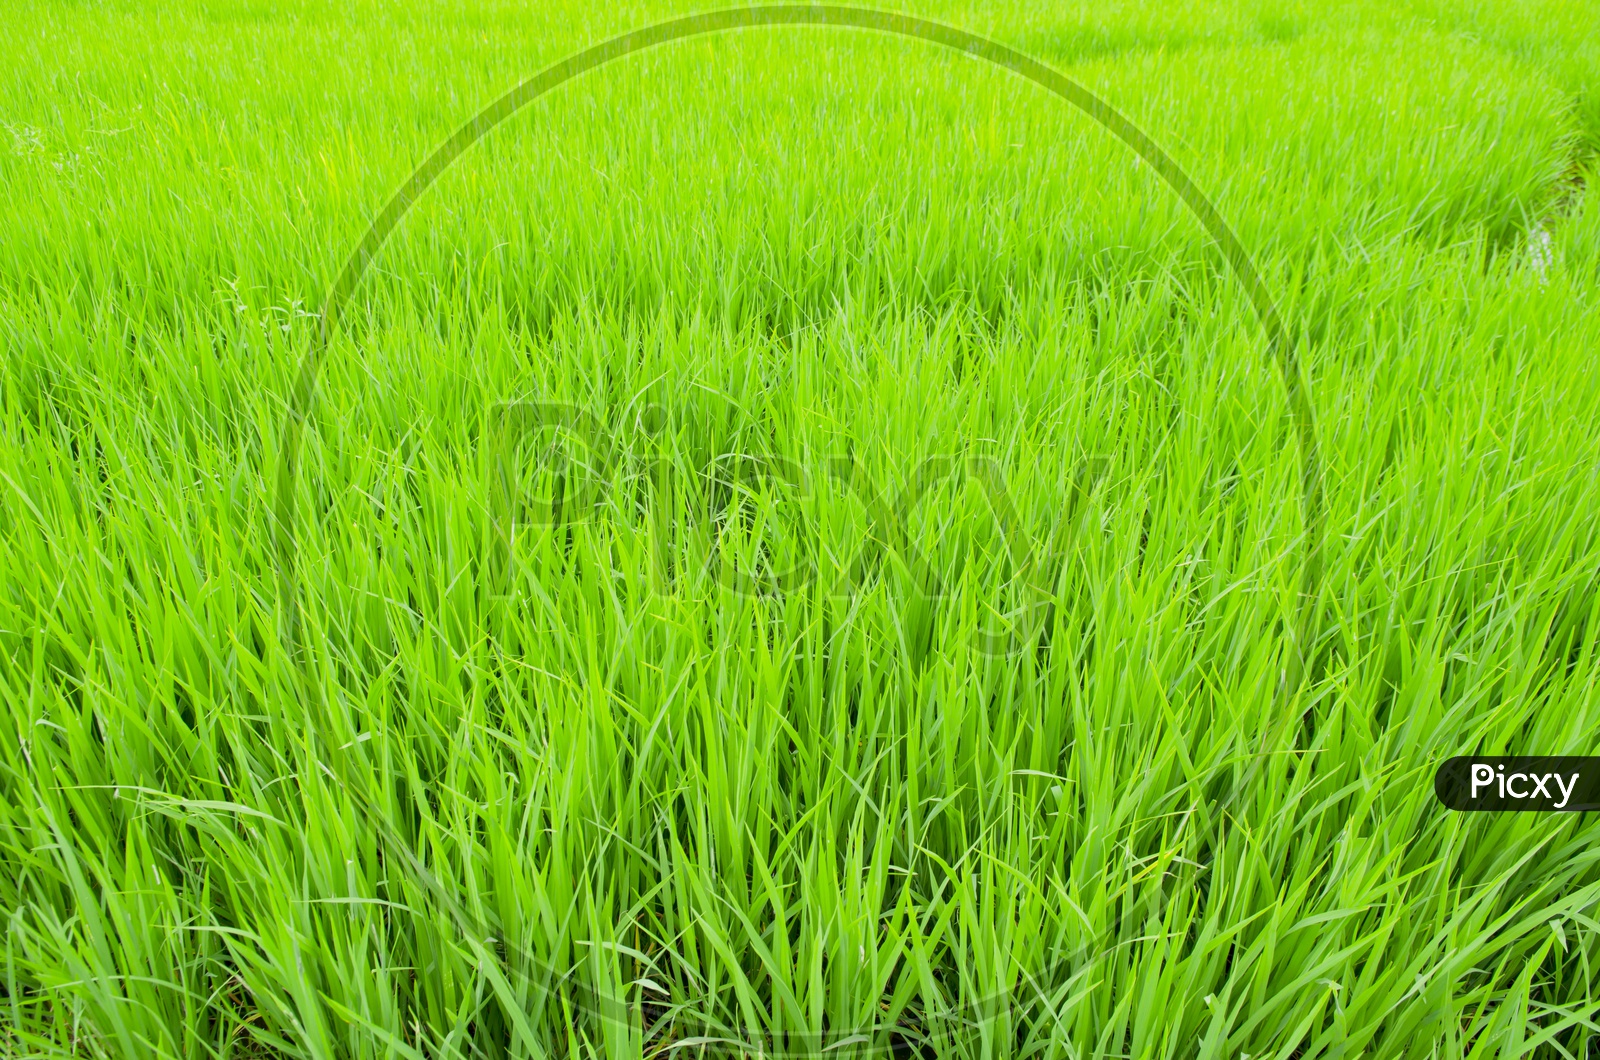 Young Green Rice Or Paddy Ears or Spikelets in Agricultural Fields